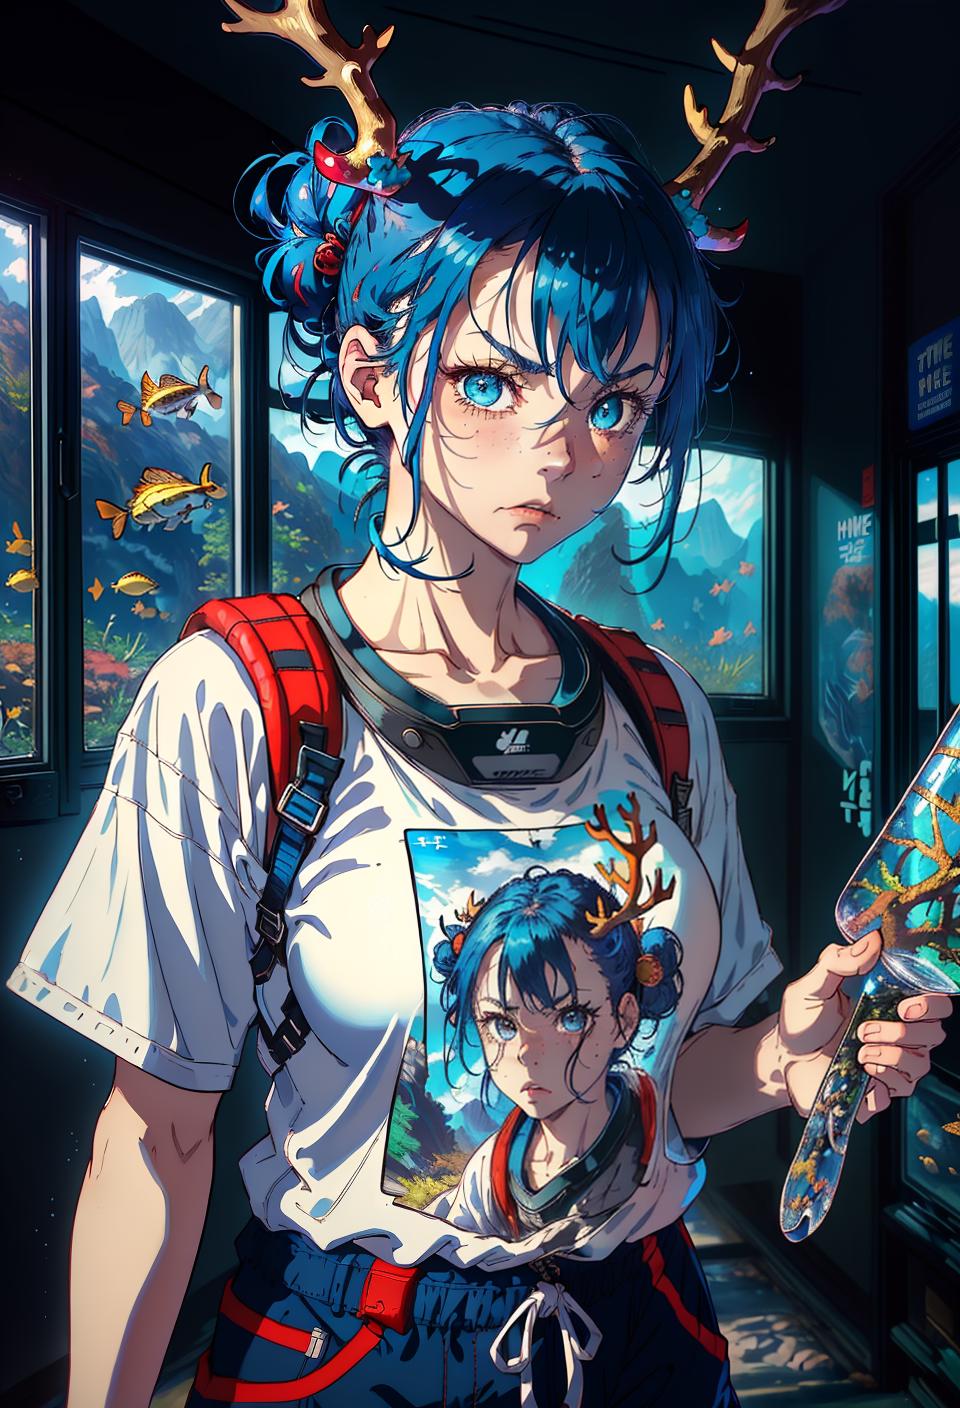  ((trending, highres, masterpiece, cinematic shot)), 1girl, mature, female hiking gear, large, aquarium scene, very short messy blue hair, hair in a bun, large heterochromia eyes, vain, self-centered personality, angry expression, antlers, fair skin, magical, energetic